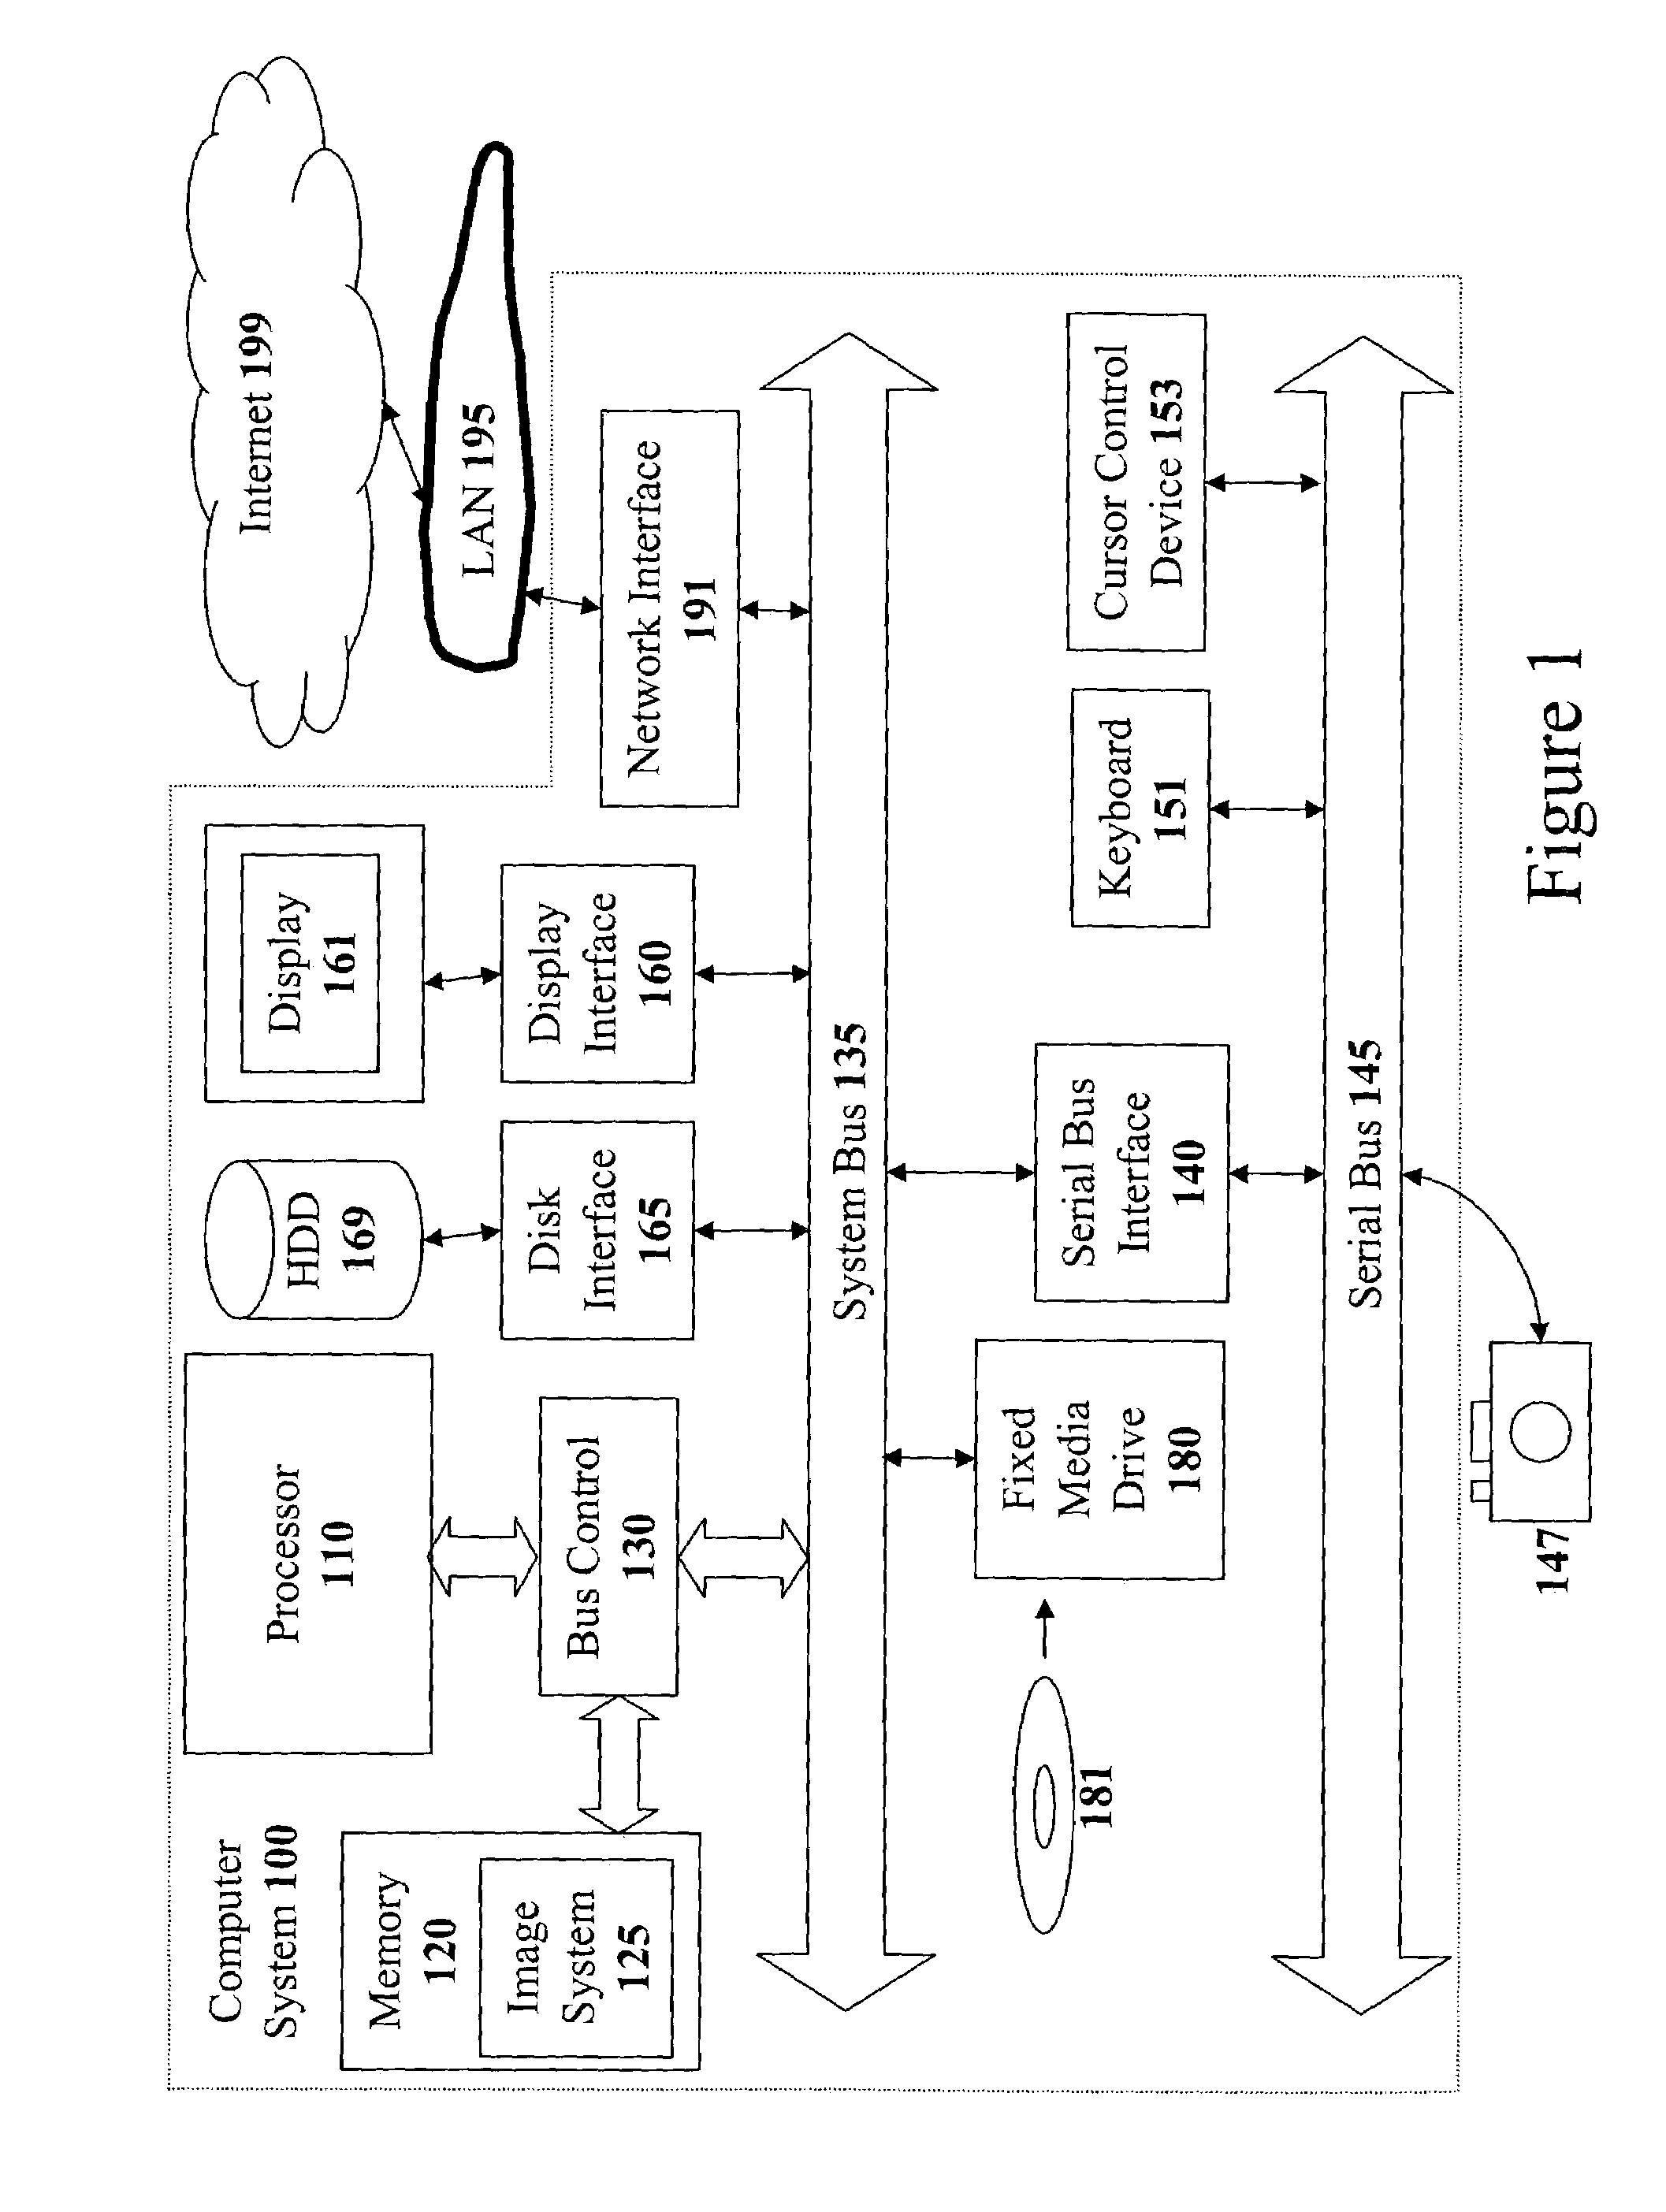 Method and apparatus for an intuitive digital image processing system that enhances digital images